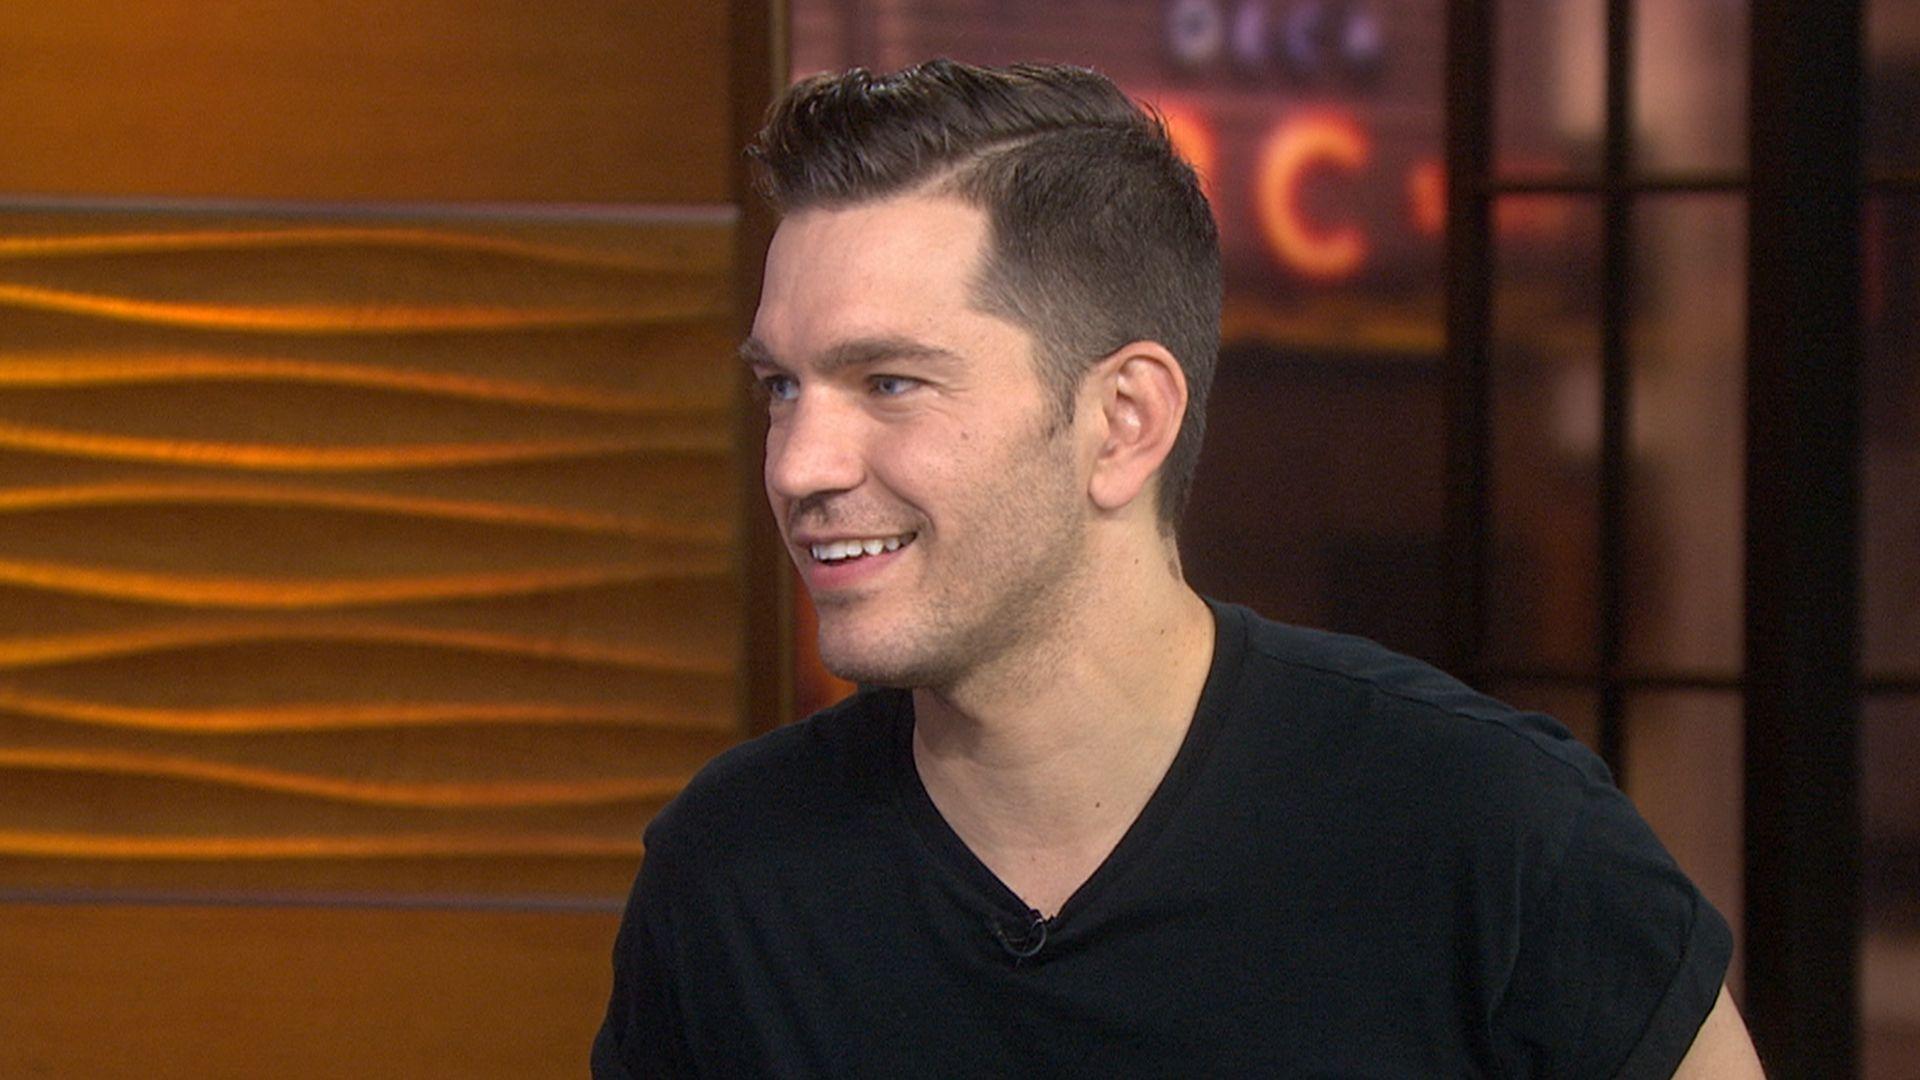 Andy Grammer: Fact that topic of monogamy is working, is pretty